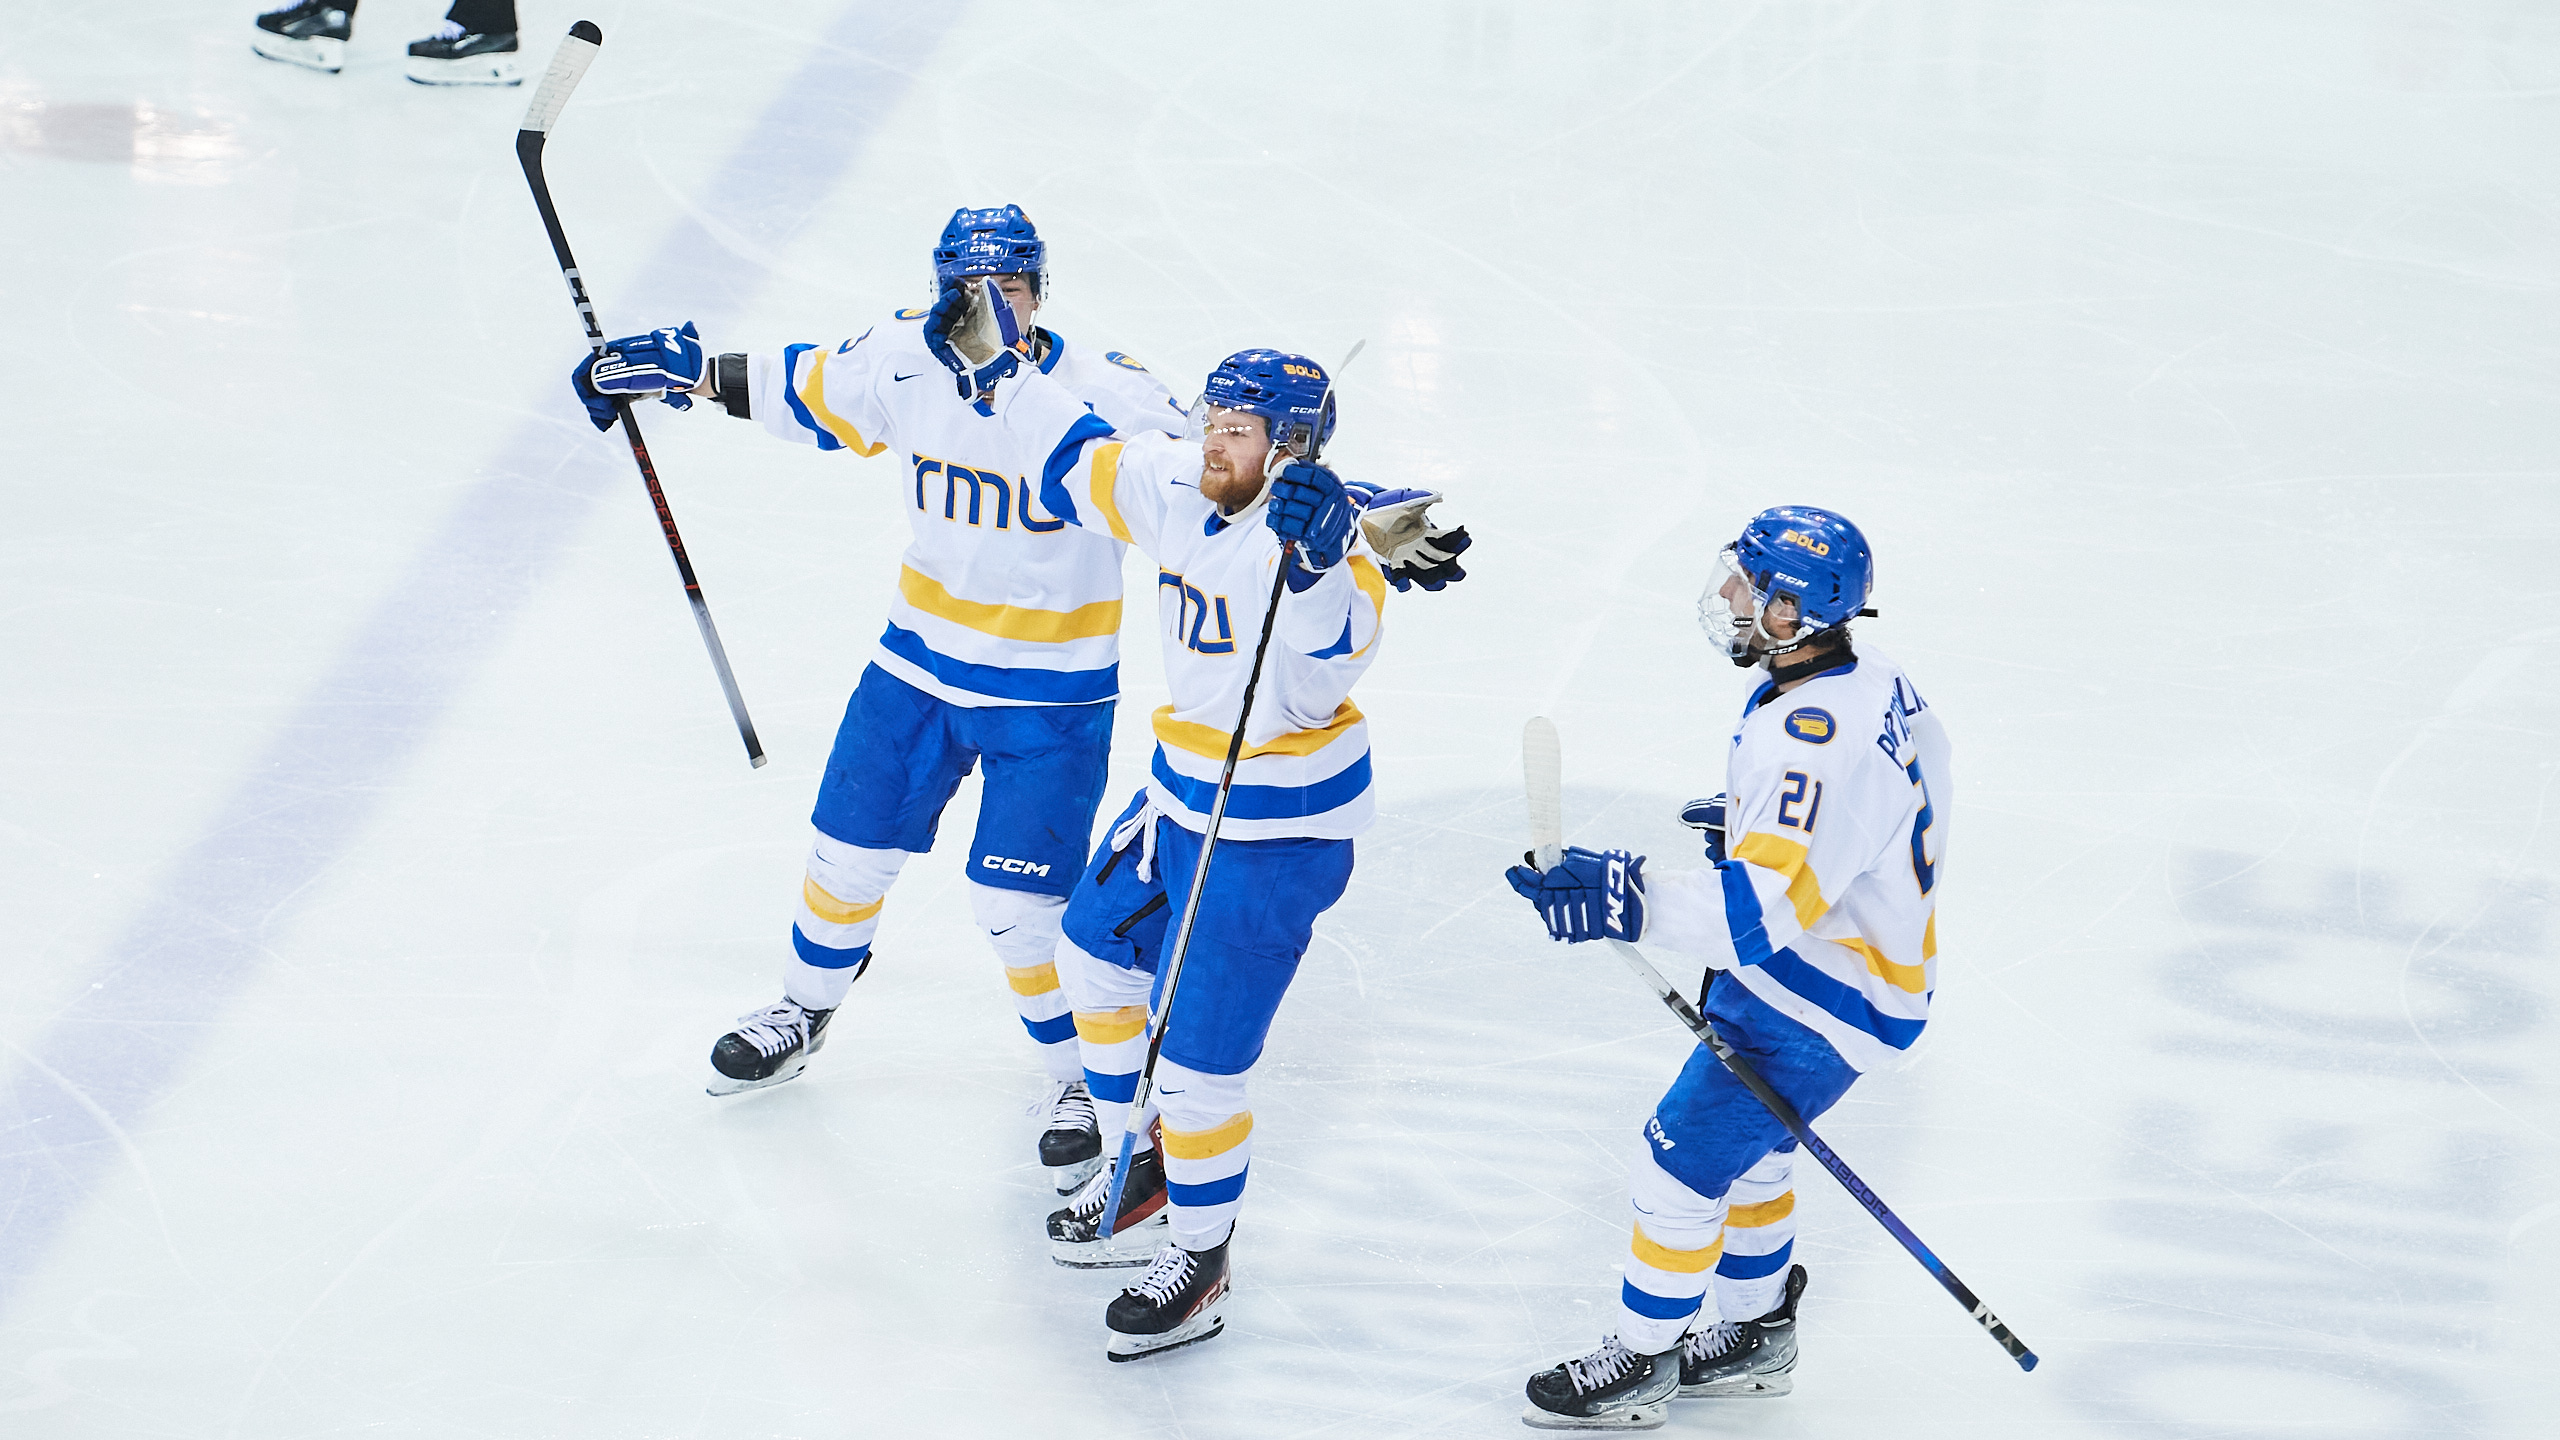 TMU Bold men's hockey player Carson Gallagher celebrates his goal with two teammates beside him